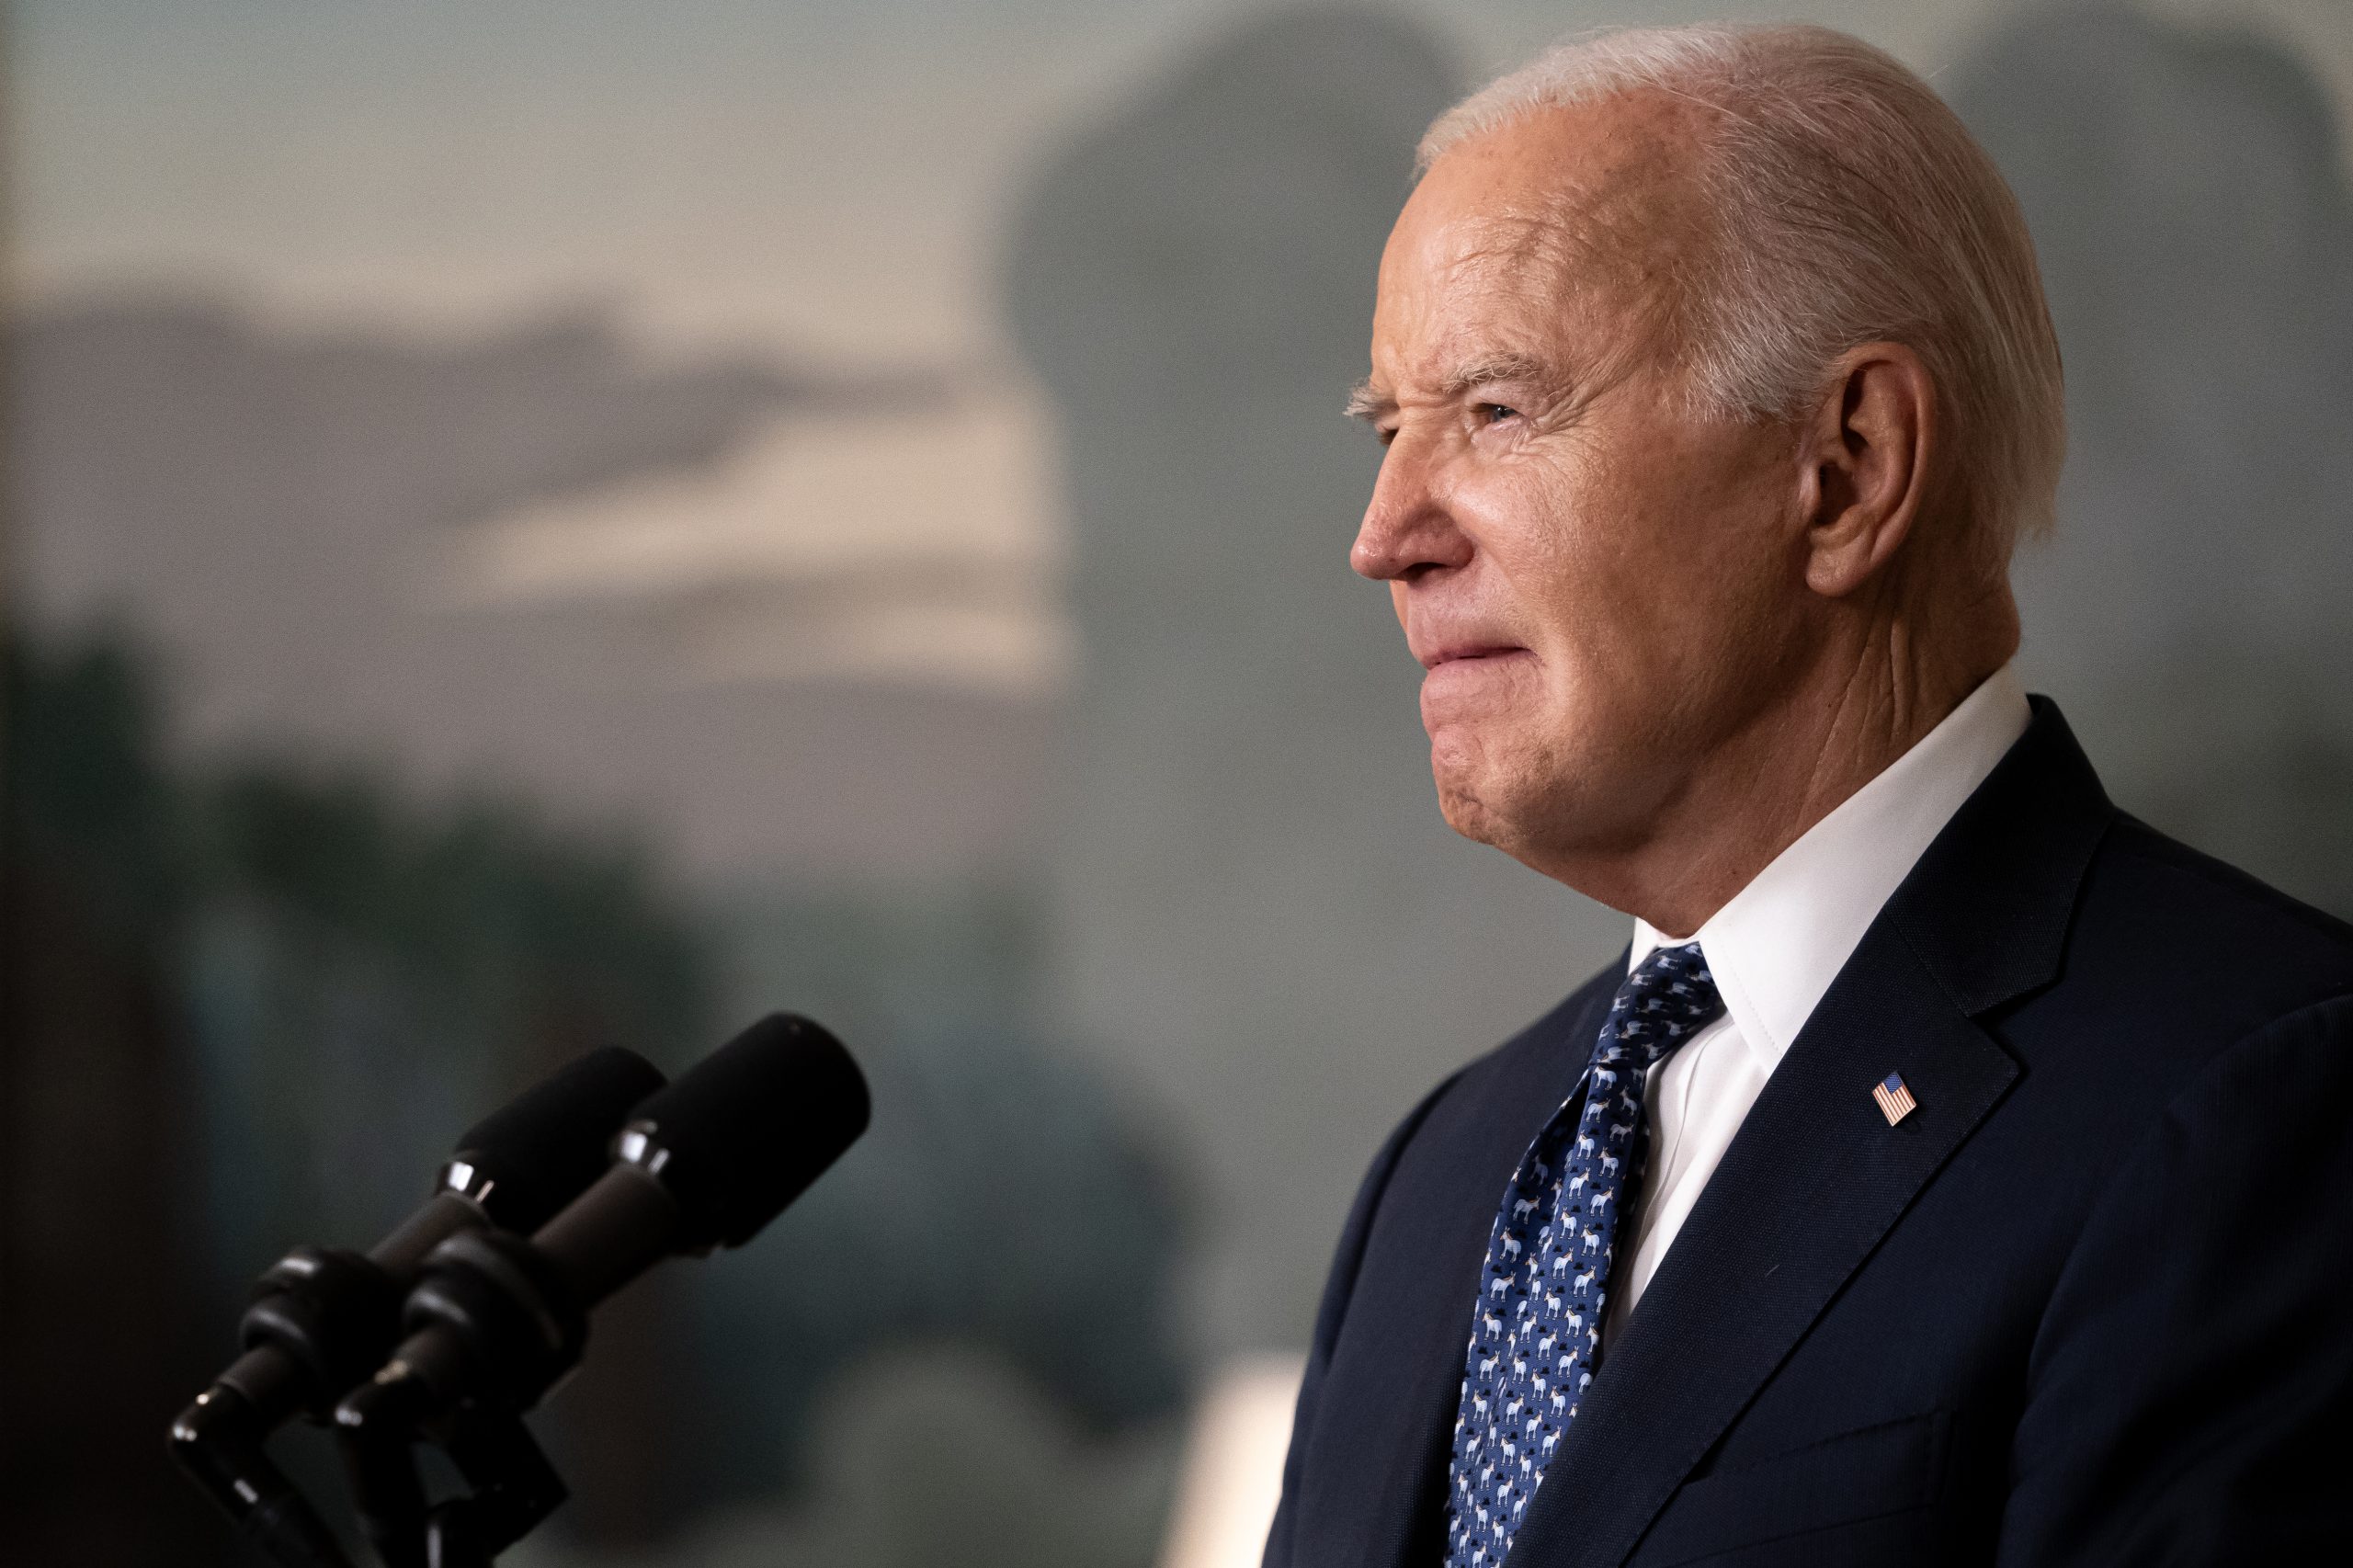 Biden’s Words on Gaza Are Getting Better. But His Actions Matter More